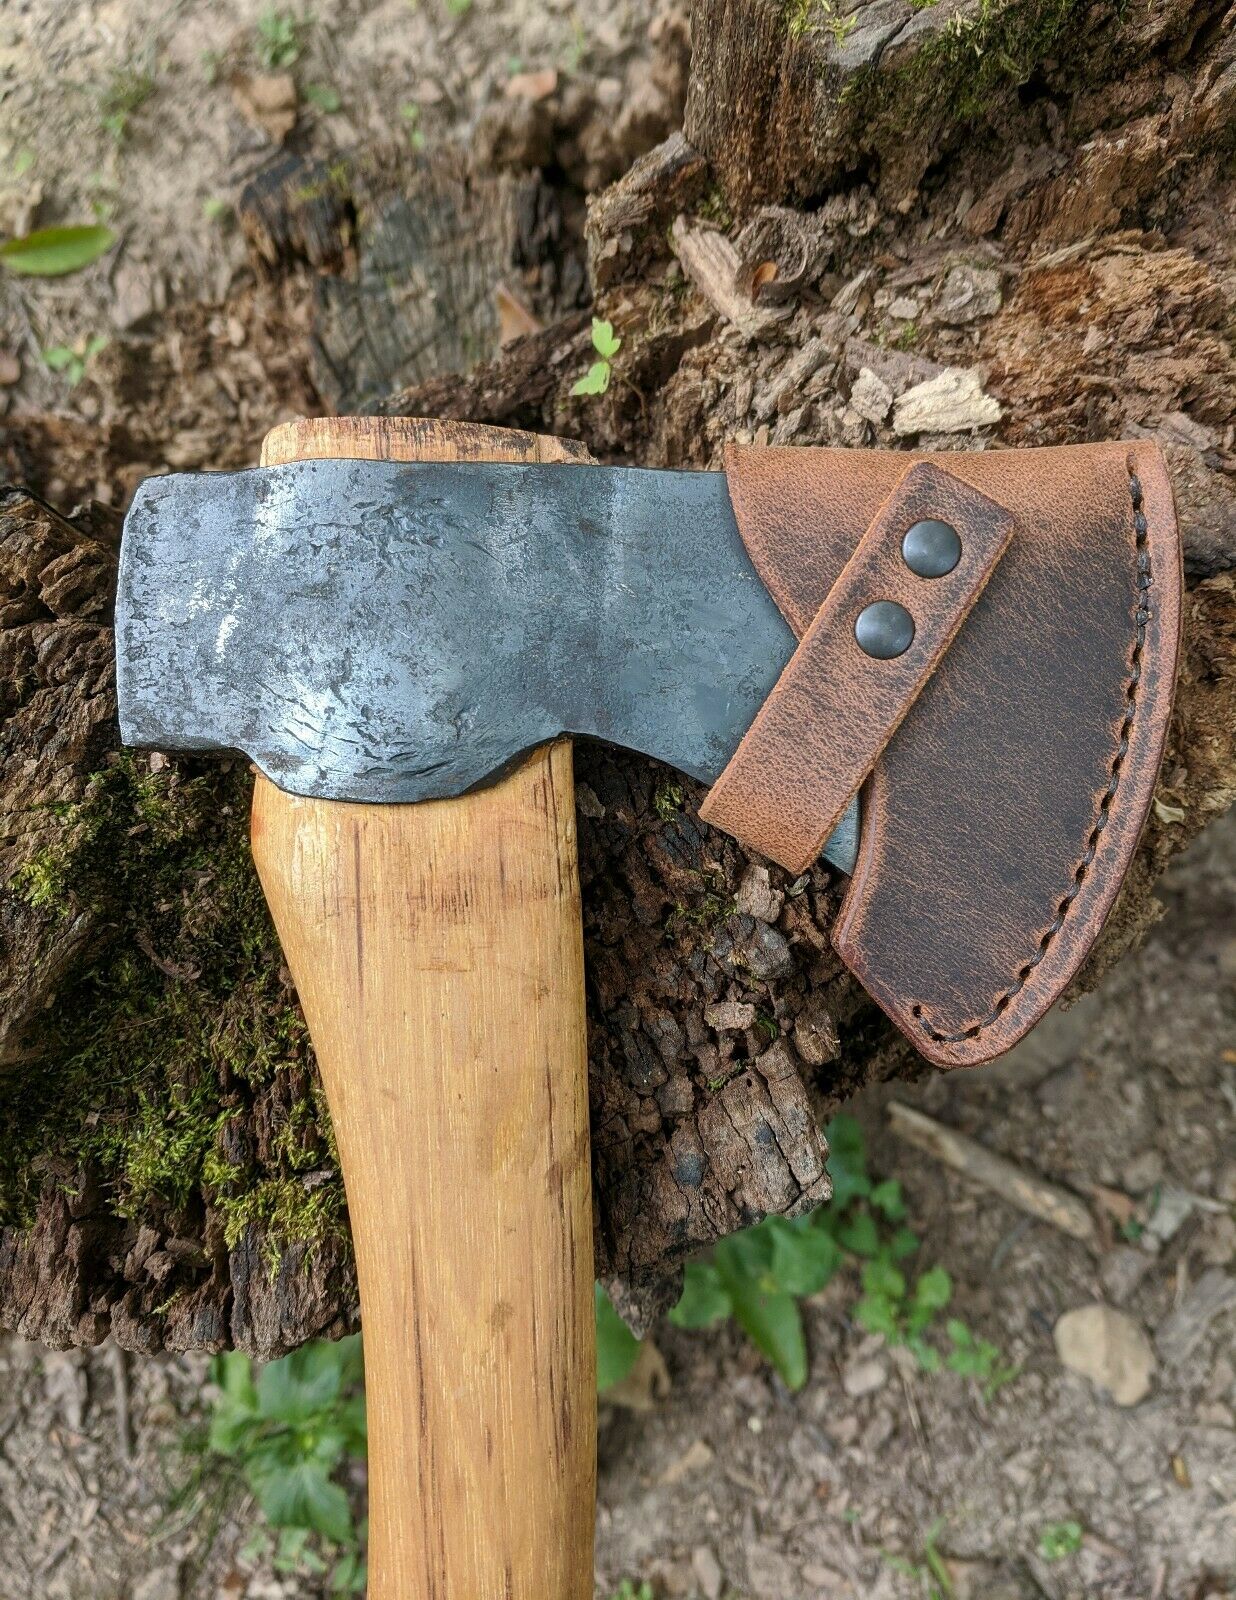 Wetterlings Axe Hatchet Buffalo Leather Sheath Mask (Axe NOT Included) Models (Hudson Bay SAW180, Small Hunting Axe 16H, Forest Axe 121 26H, 111 Expedition Hatchet, Les Stroud Bushman Axe, Scout Hatchet)